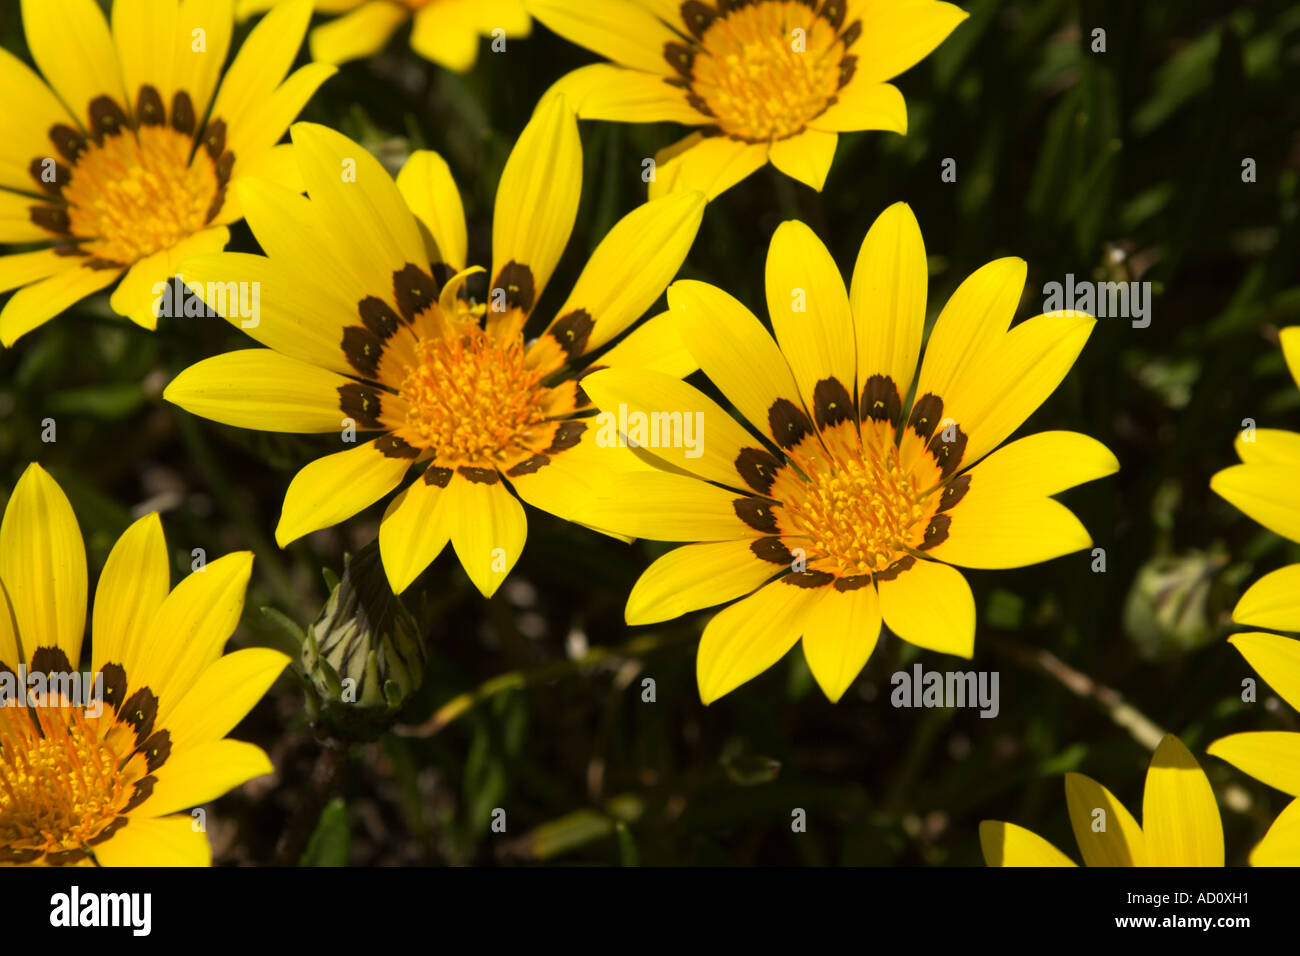 Flower lily yellow dark patch pansy Stock Photo